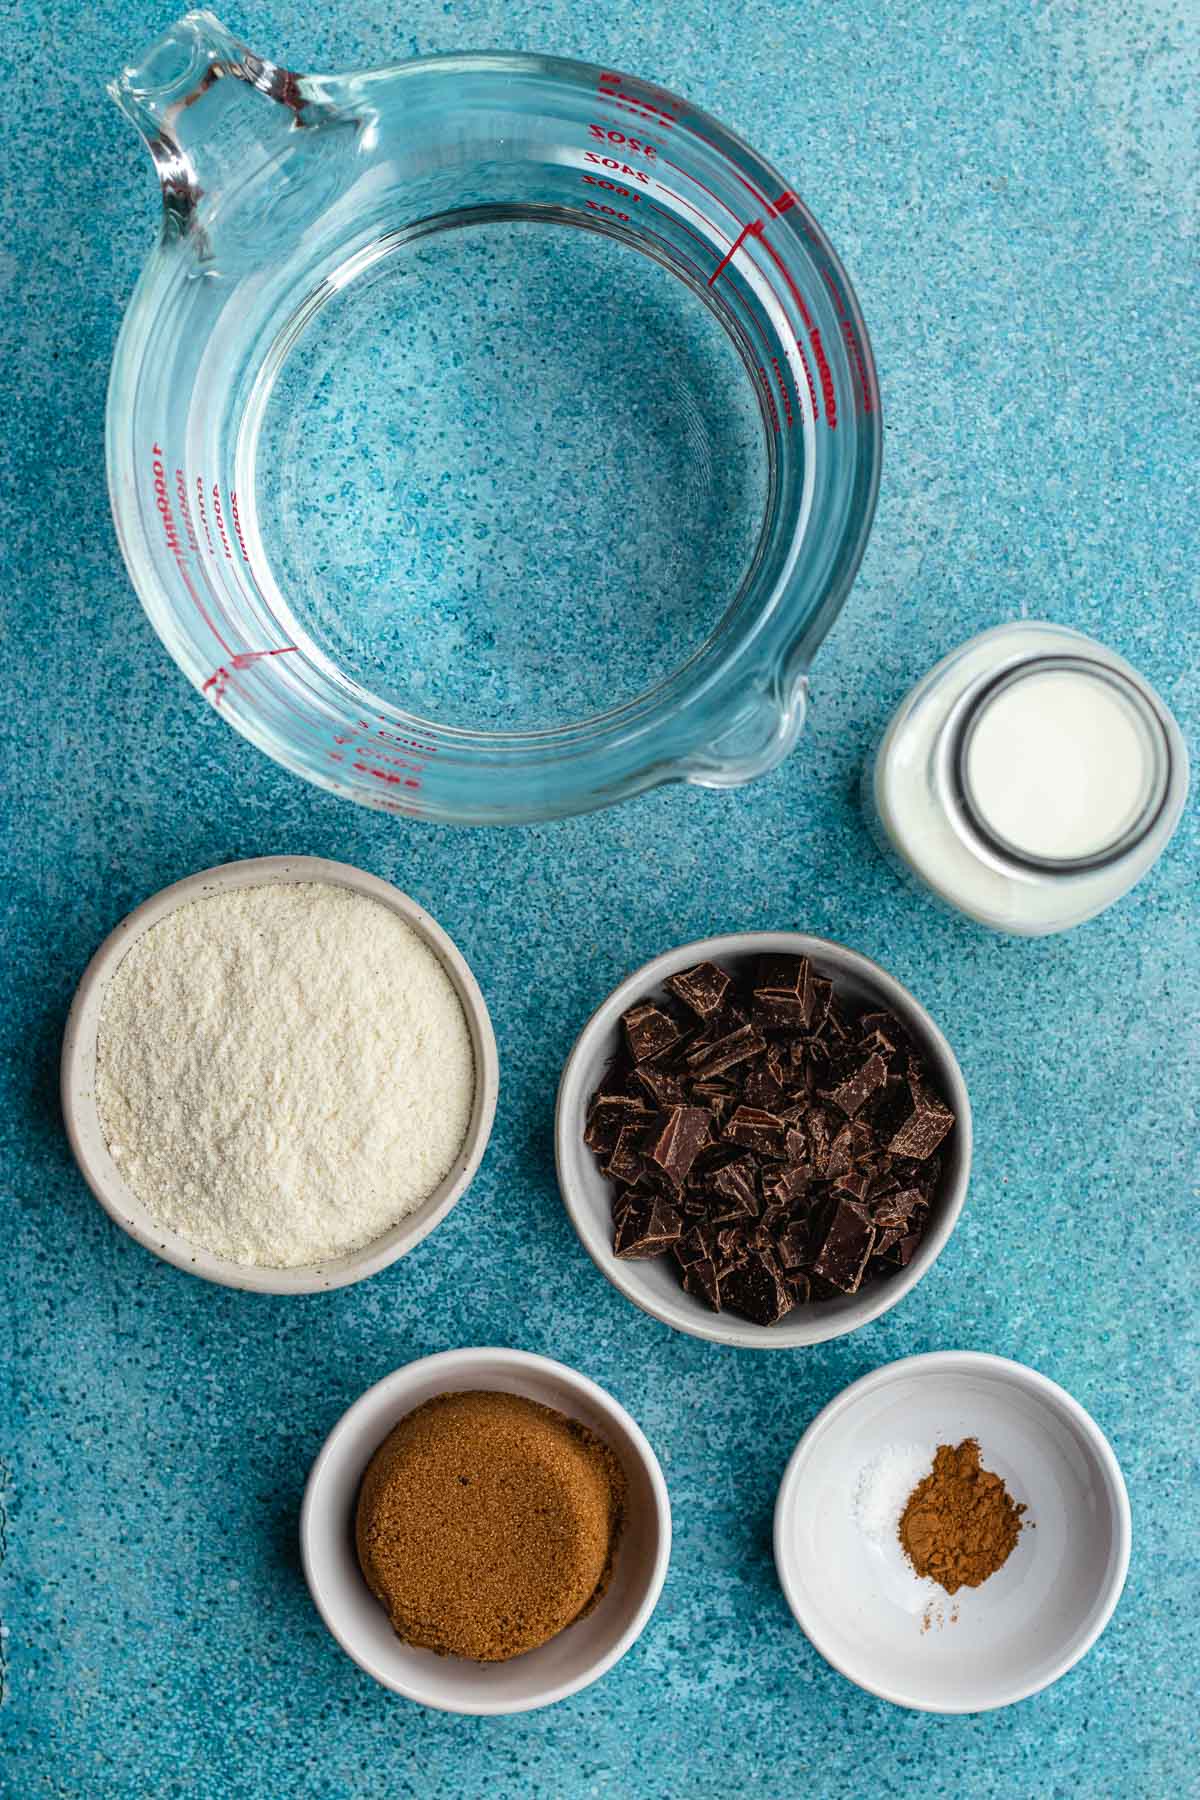 Champurrado ingredients separated in bowls and containers